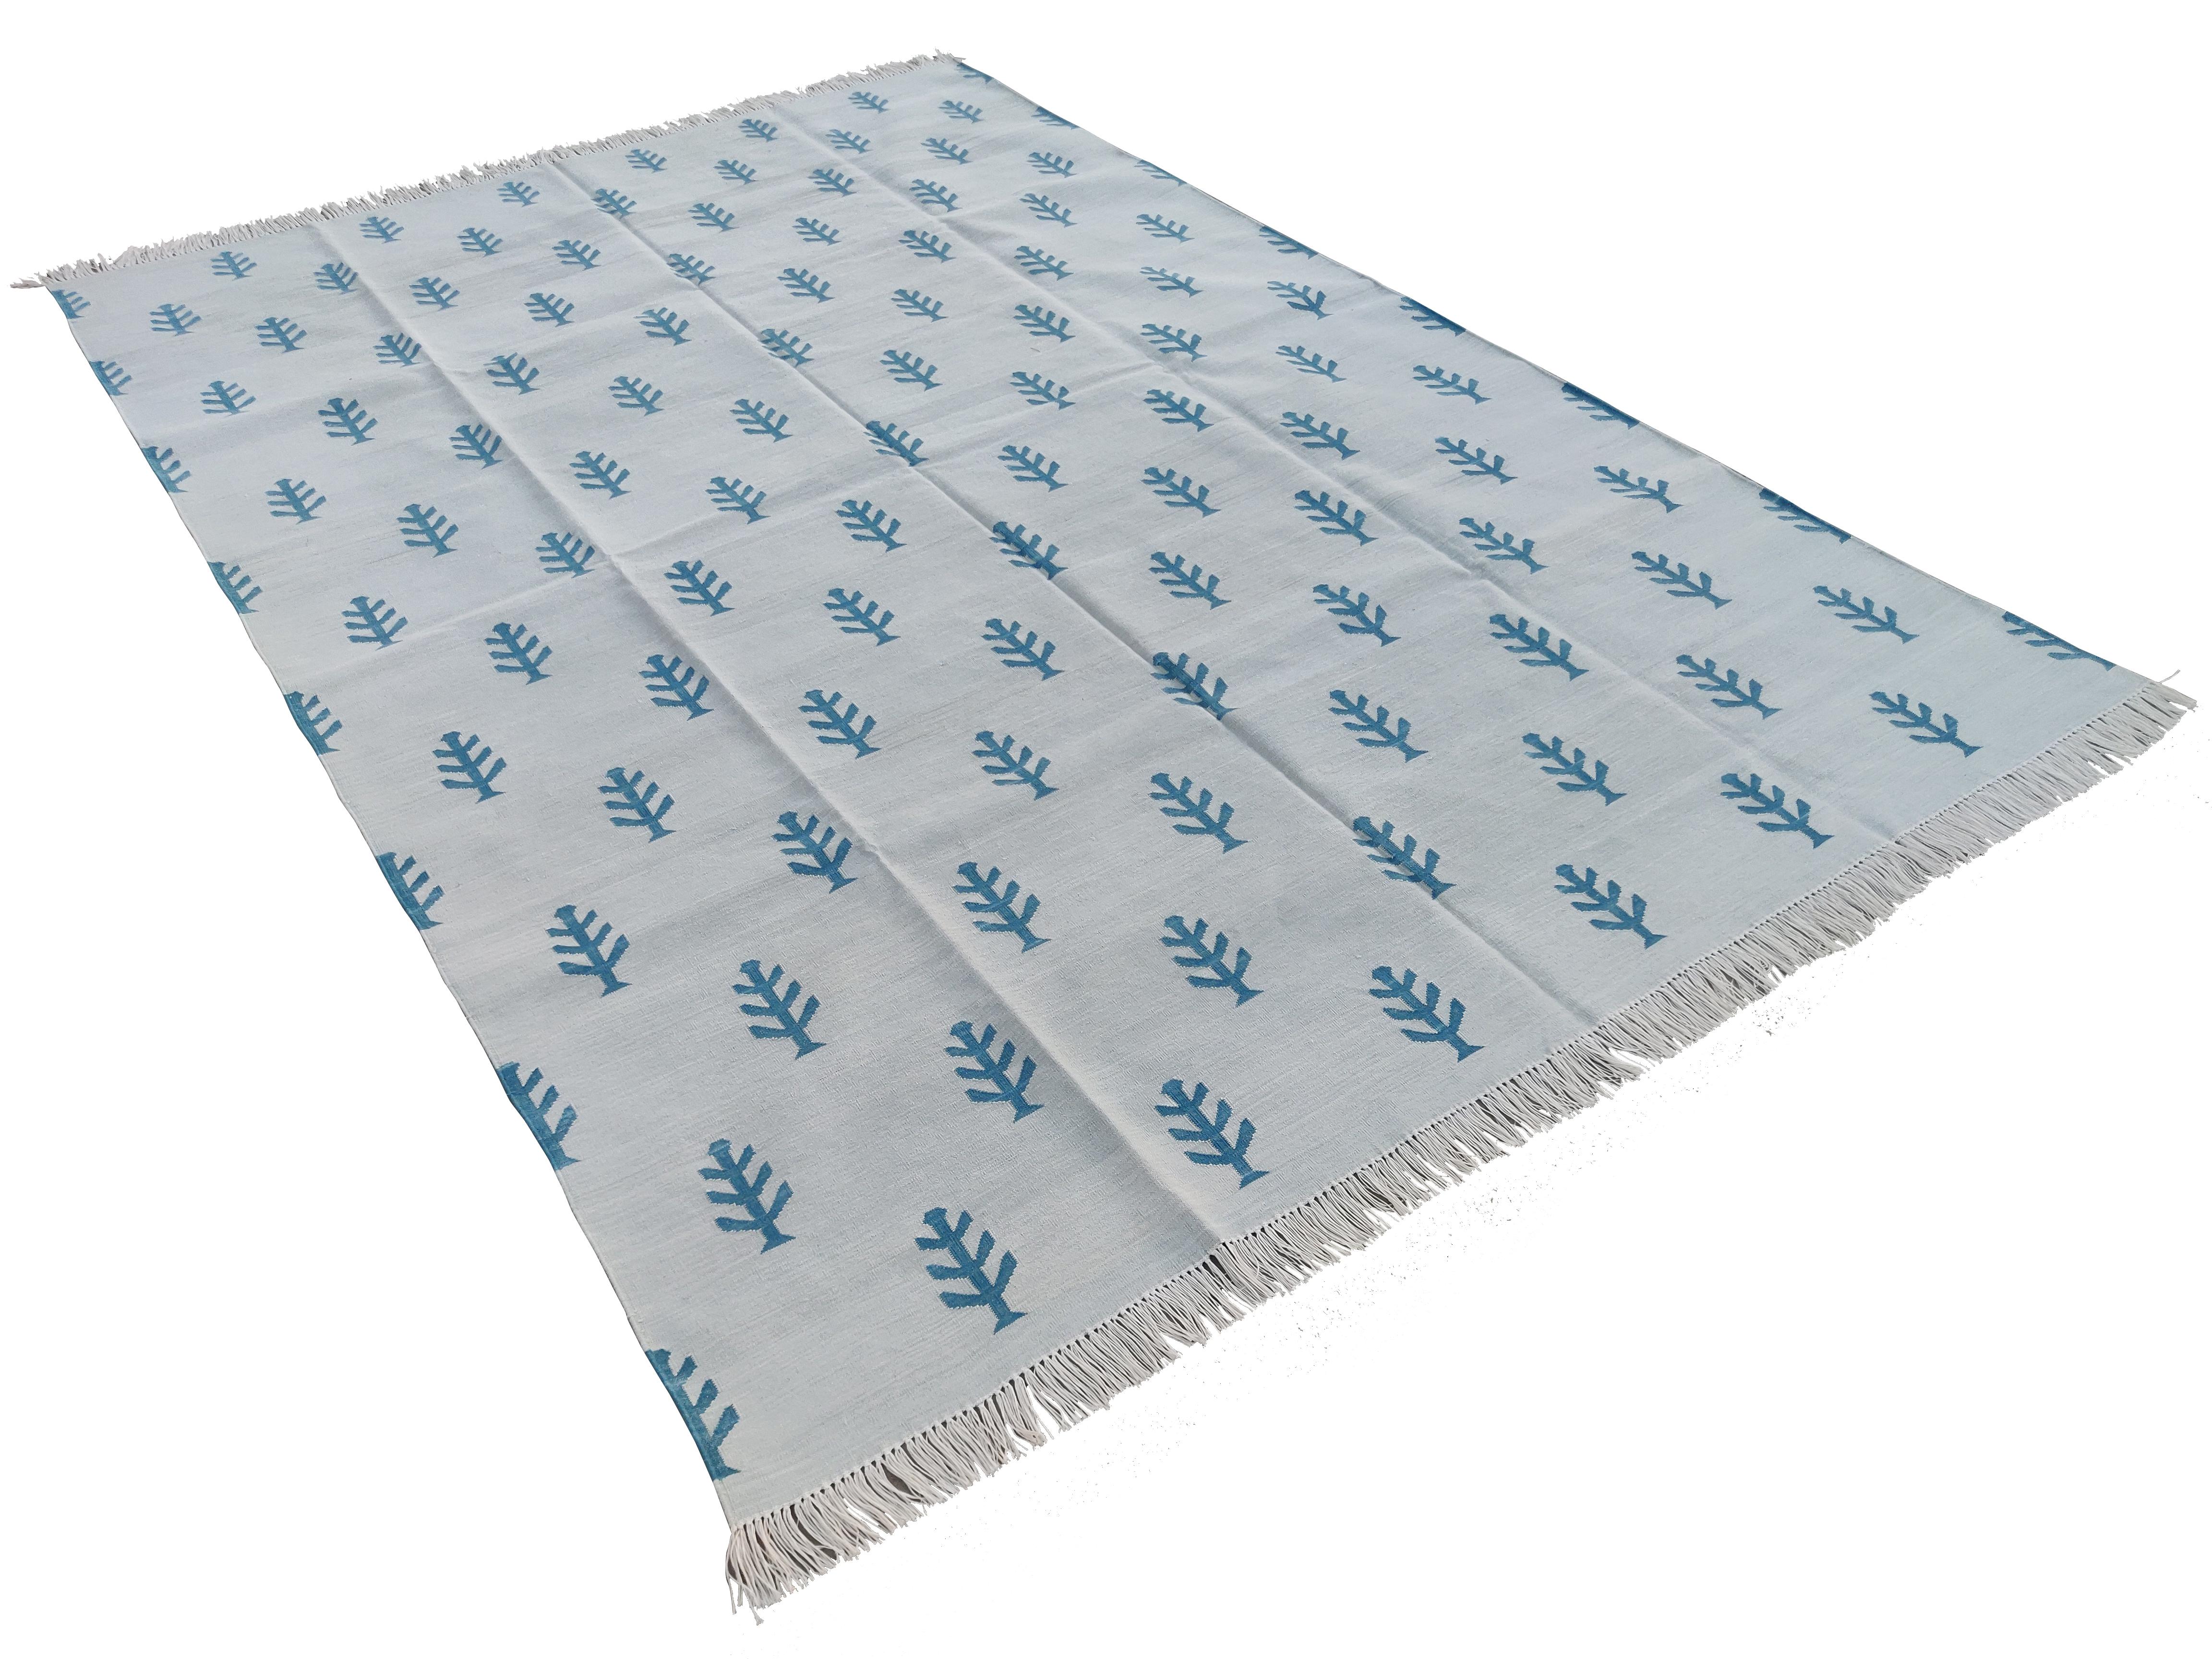 Cotton Vegetable Dyed Reversible Grey And Teal Blue Tree Patterned Indian Rug - 5'x7'
These special flat-weave dhurries are hand-woven with 15 ply 100% cotton yarn. Due to the special manufacturing techniques used to create our rugs, the size and